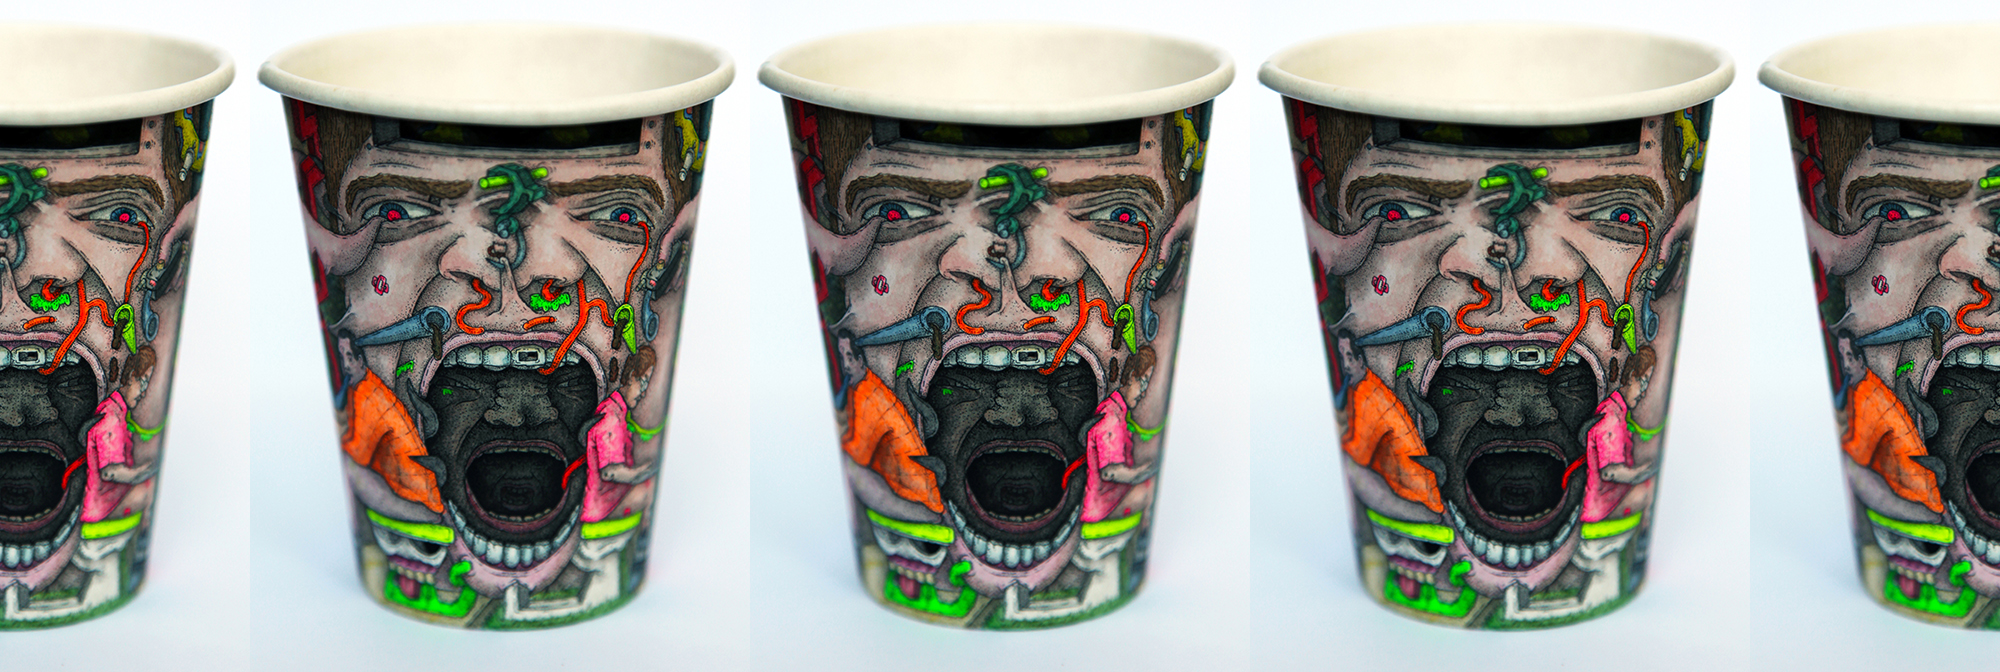 Drawing on paper cups by Paul Westcombe.